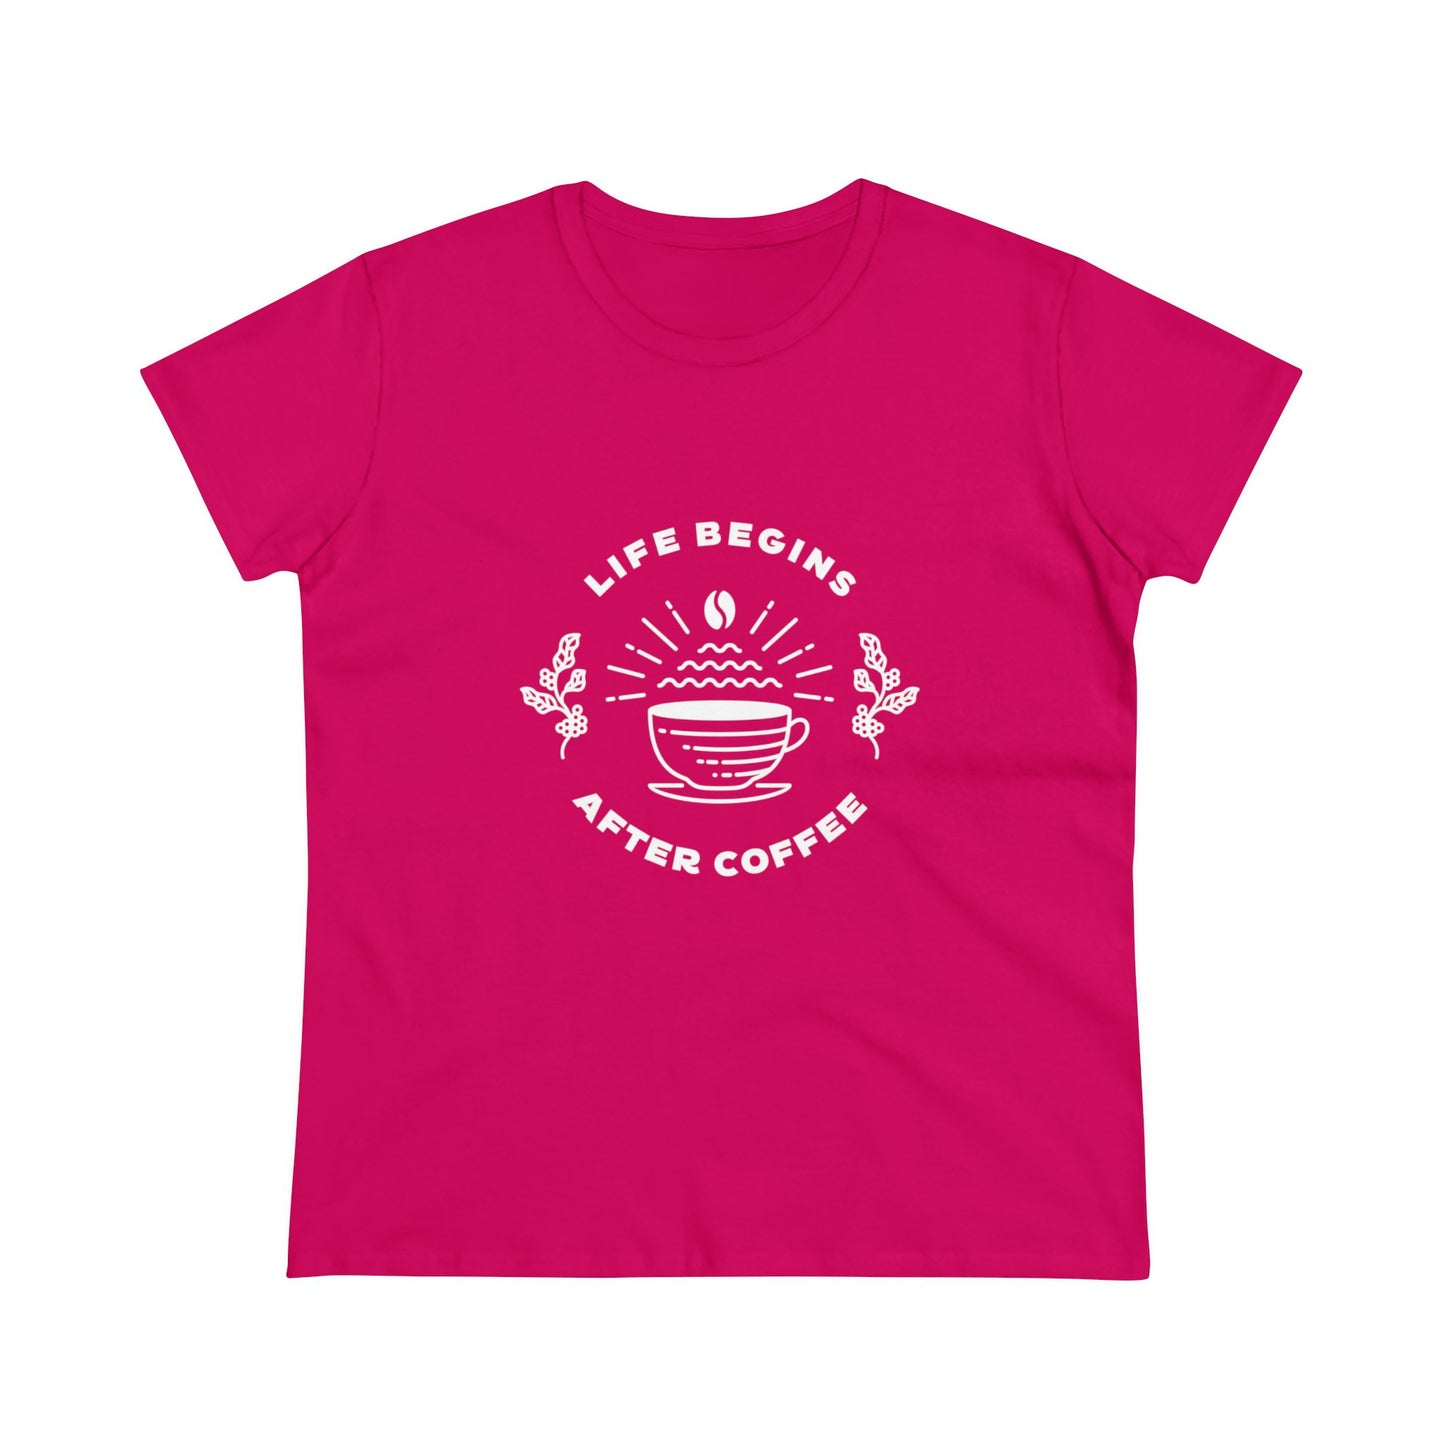 Life Begins After Coffee. Women's Midweight Cotton Tee